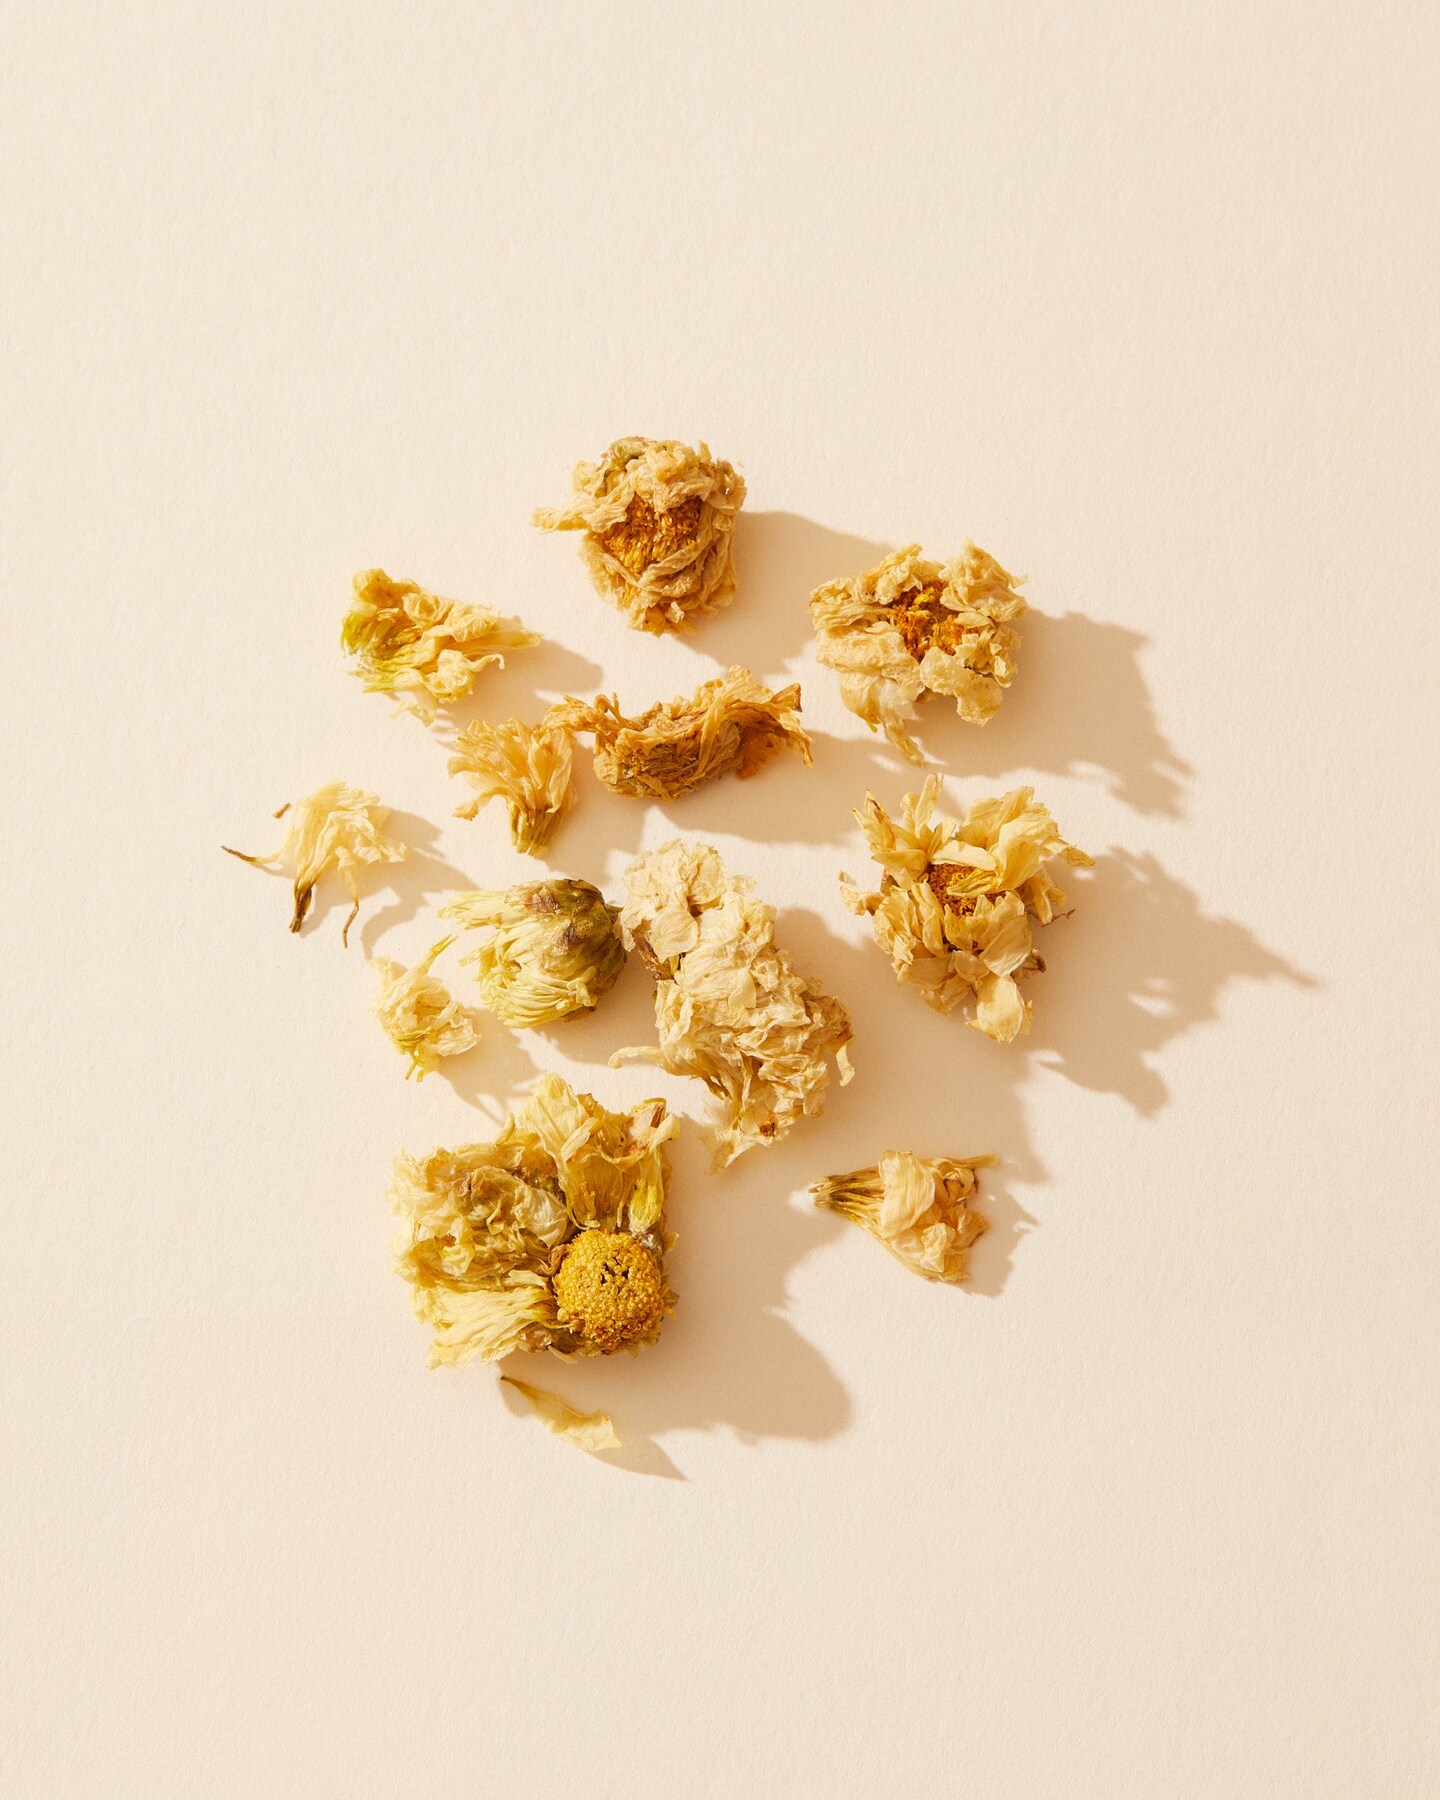 Chrysanthemum Flowers | Dried Flowers for Soap, Body Care